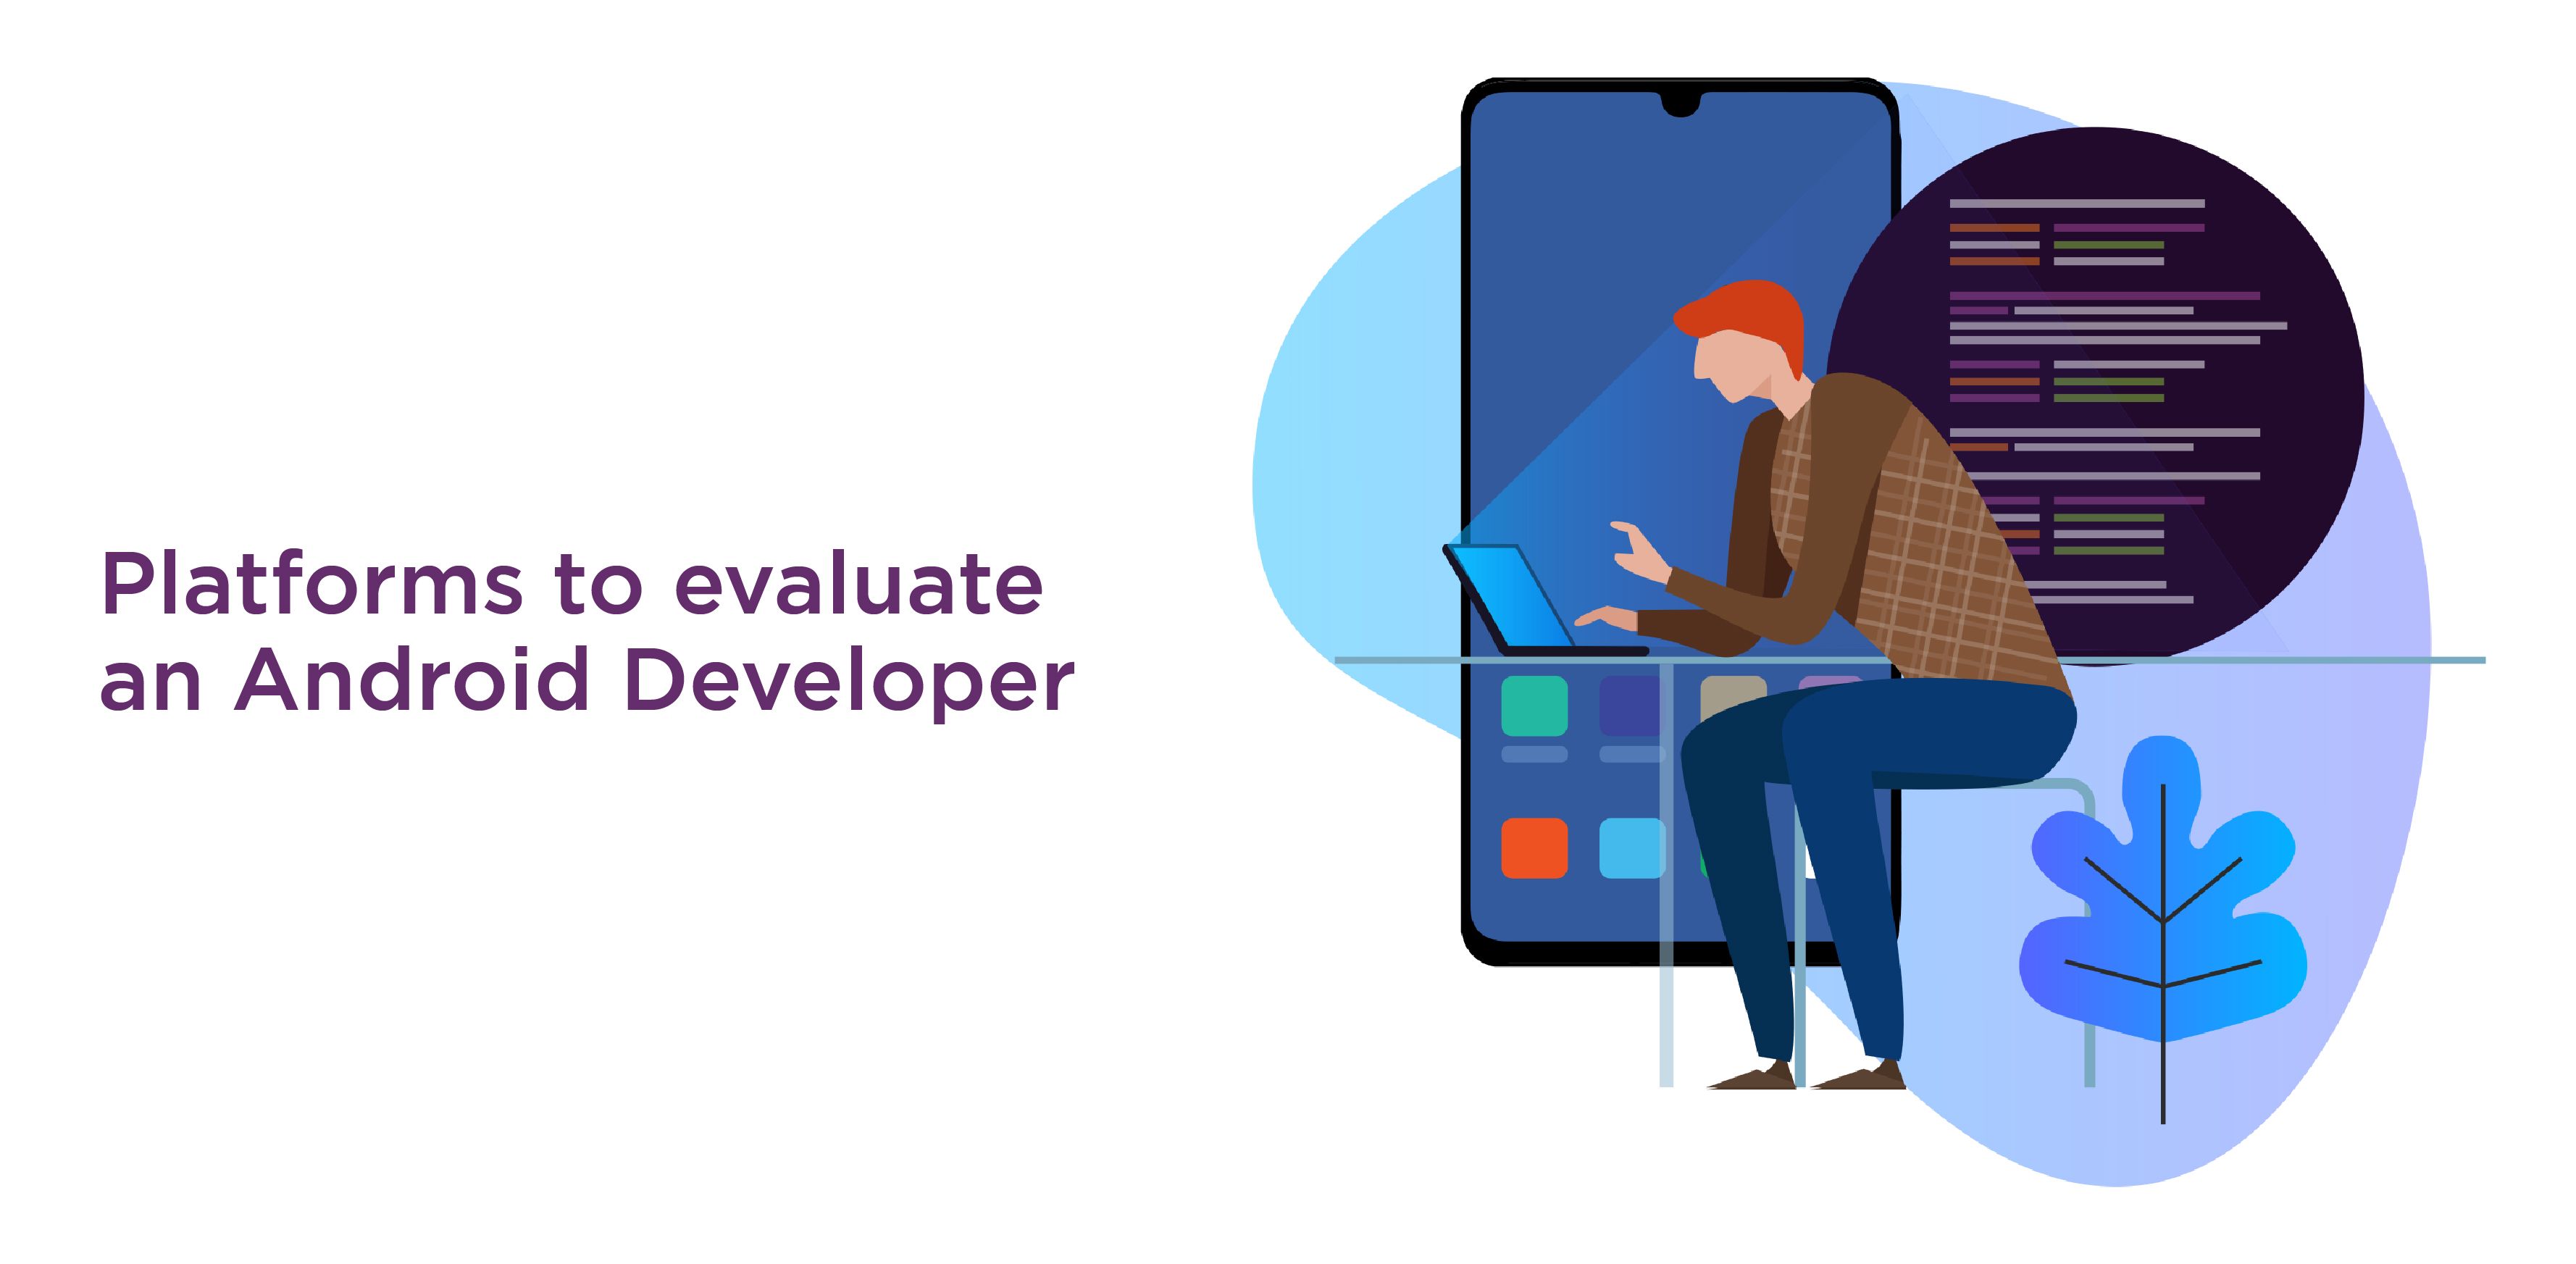 How can you use these talent assessment platforms to evaluate an Android Developer: